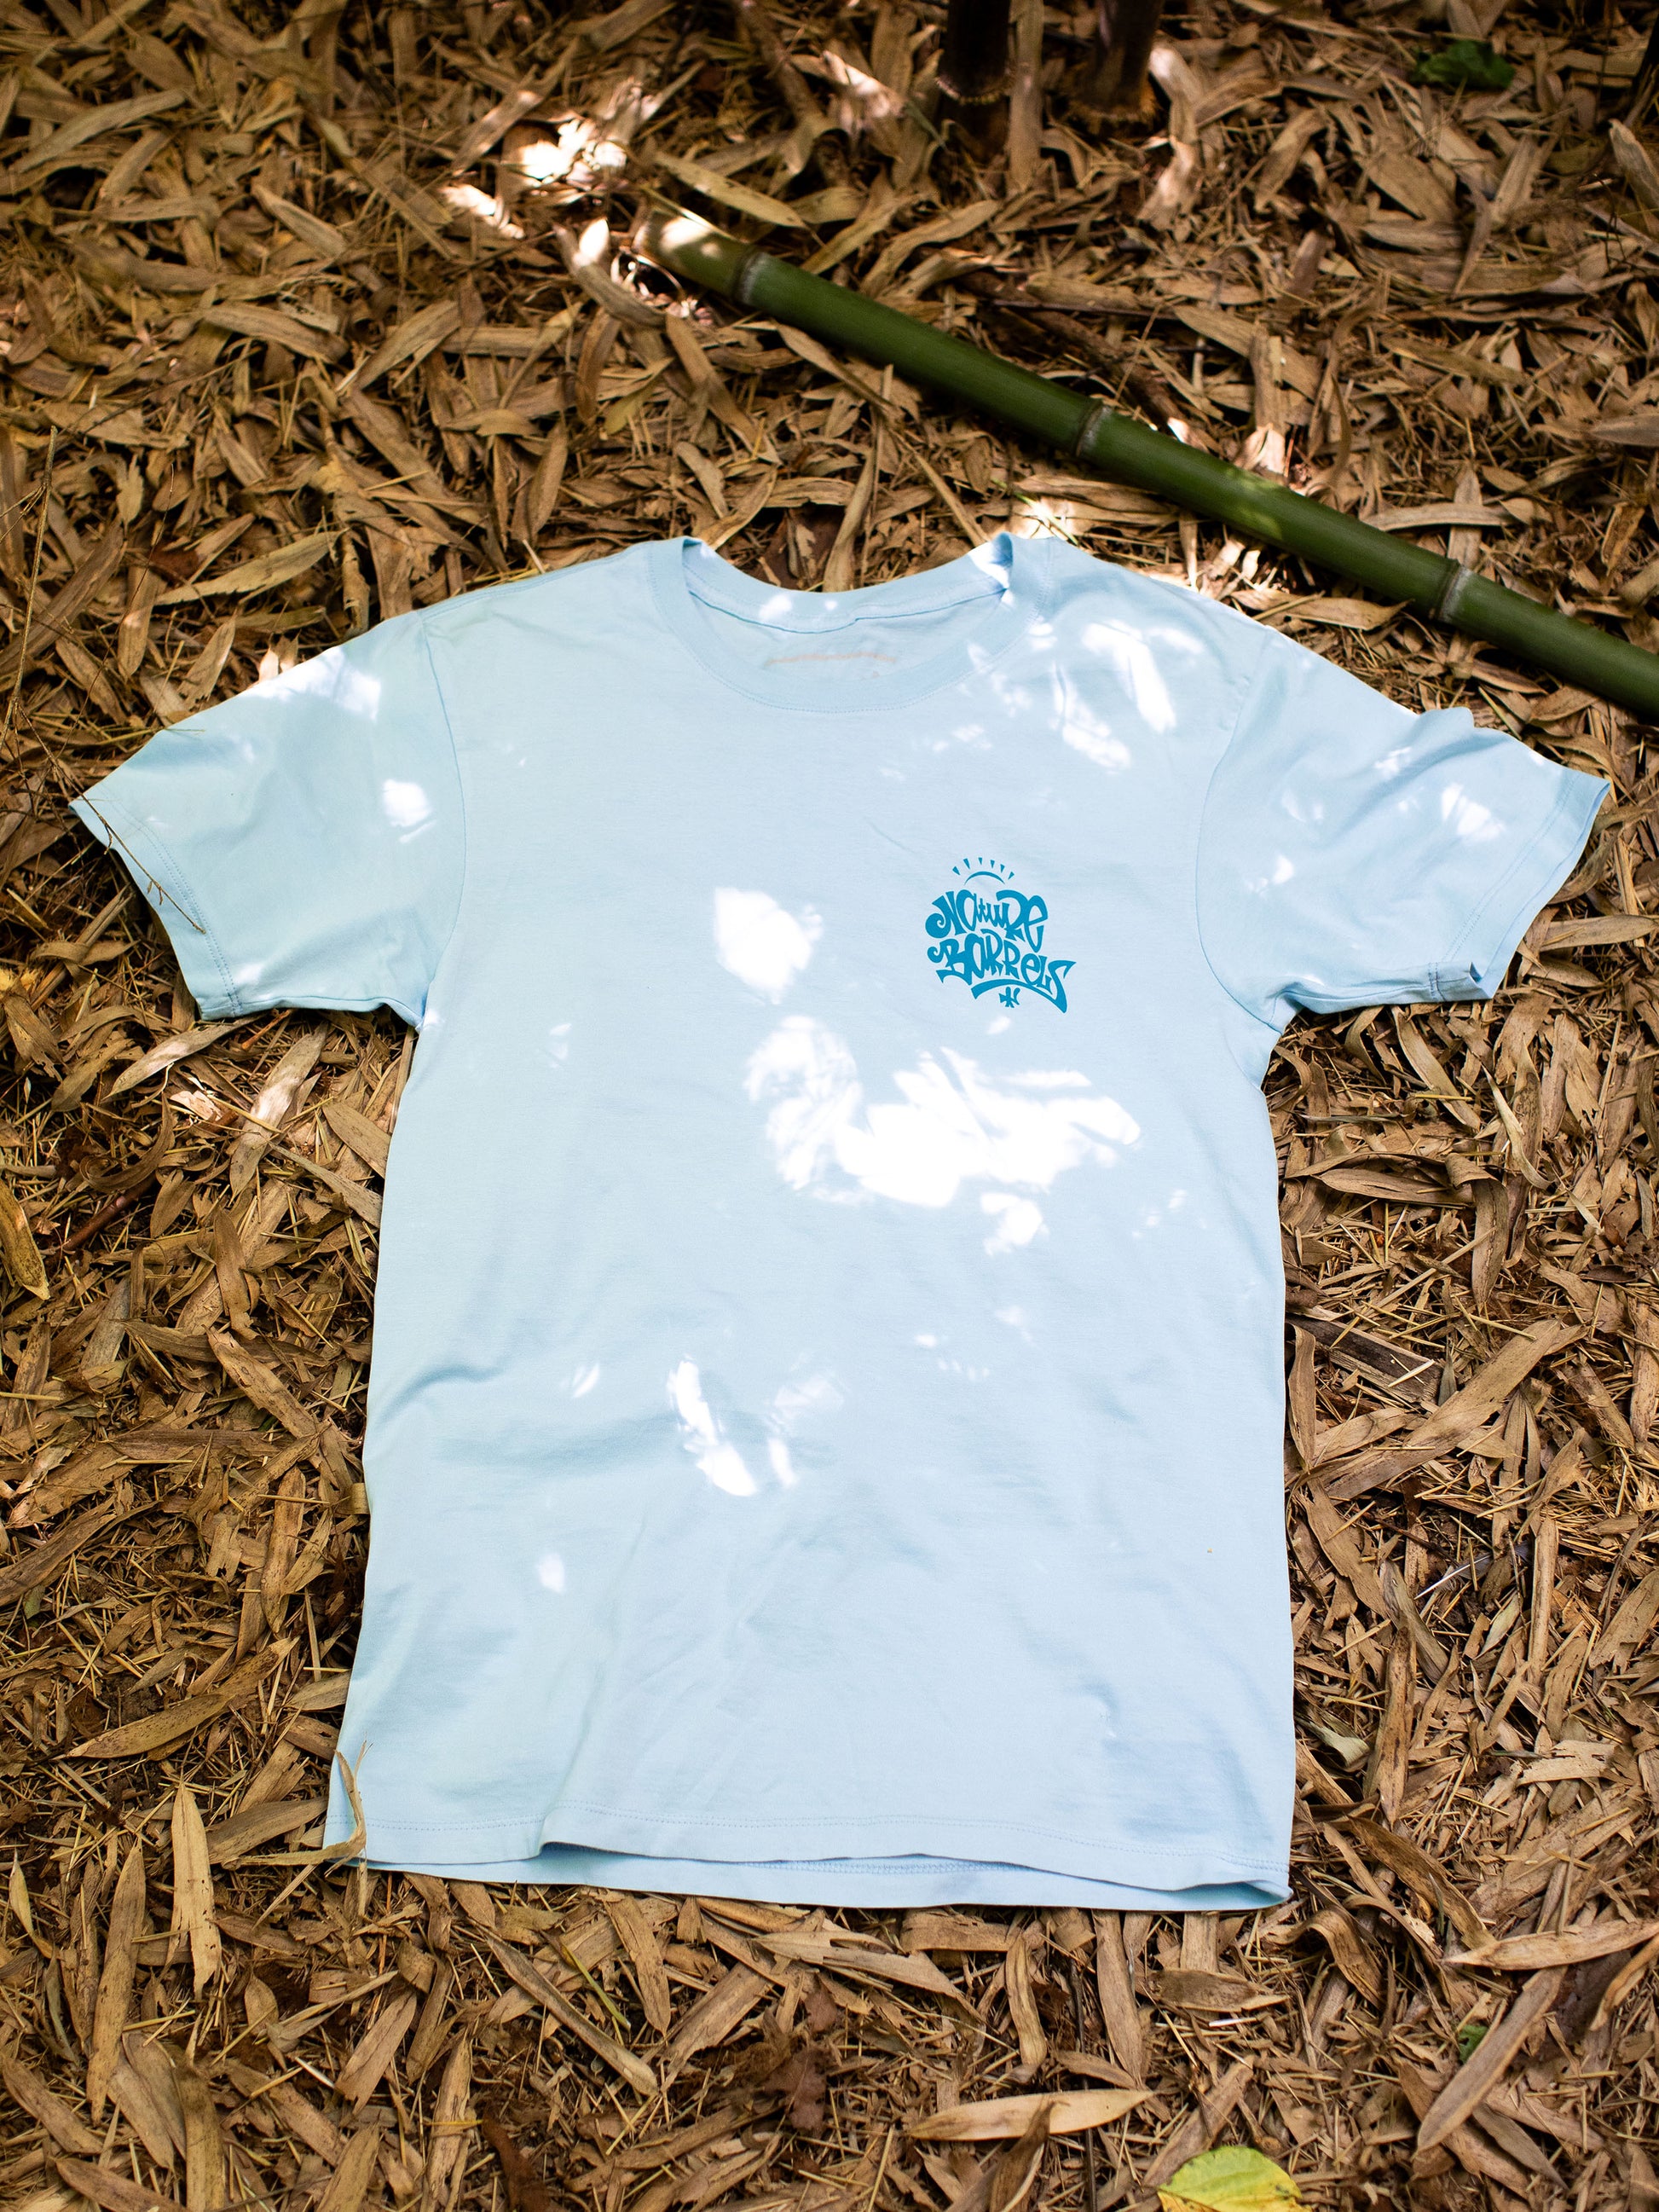 Light blue t-shirt lying flat on a bed of dried bamboo leaves, with a small logo printed on the upper left side on contrasting dark blue. The logo reads "Nature Barrels" in the style of artist Andrew Jacob.   The shirt is centered in the frame, with a hint of sunlight filtering through the foliage above, creating patterns of light and shadow on the fabric and the ground around it.